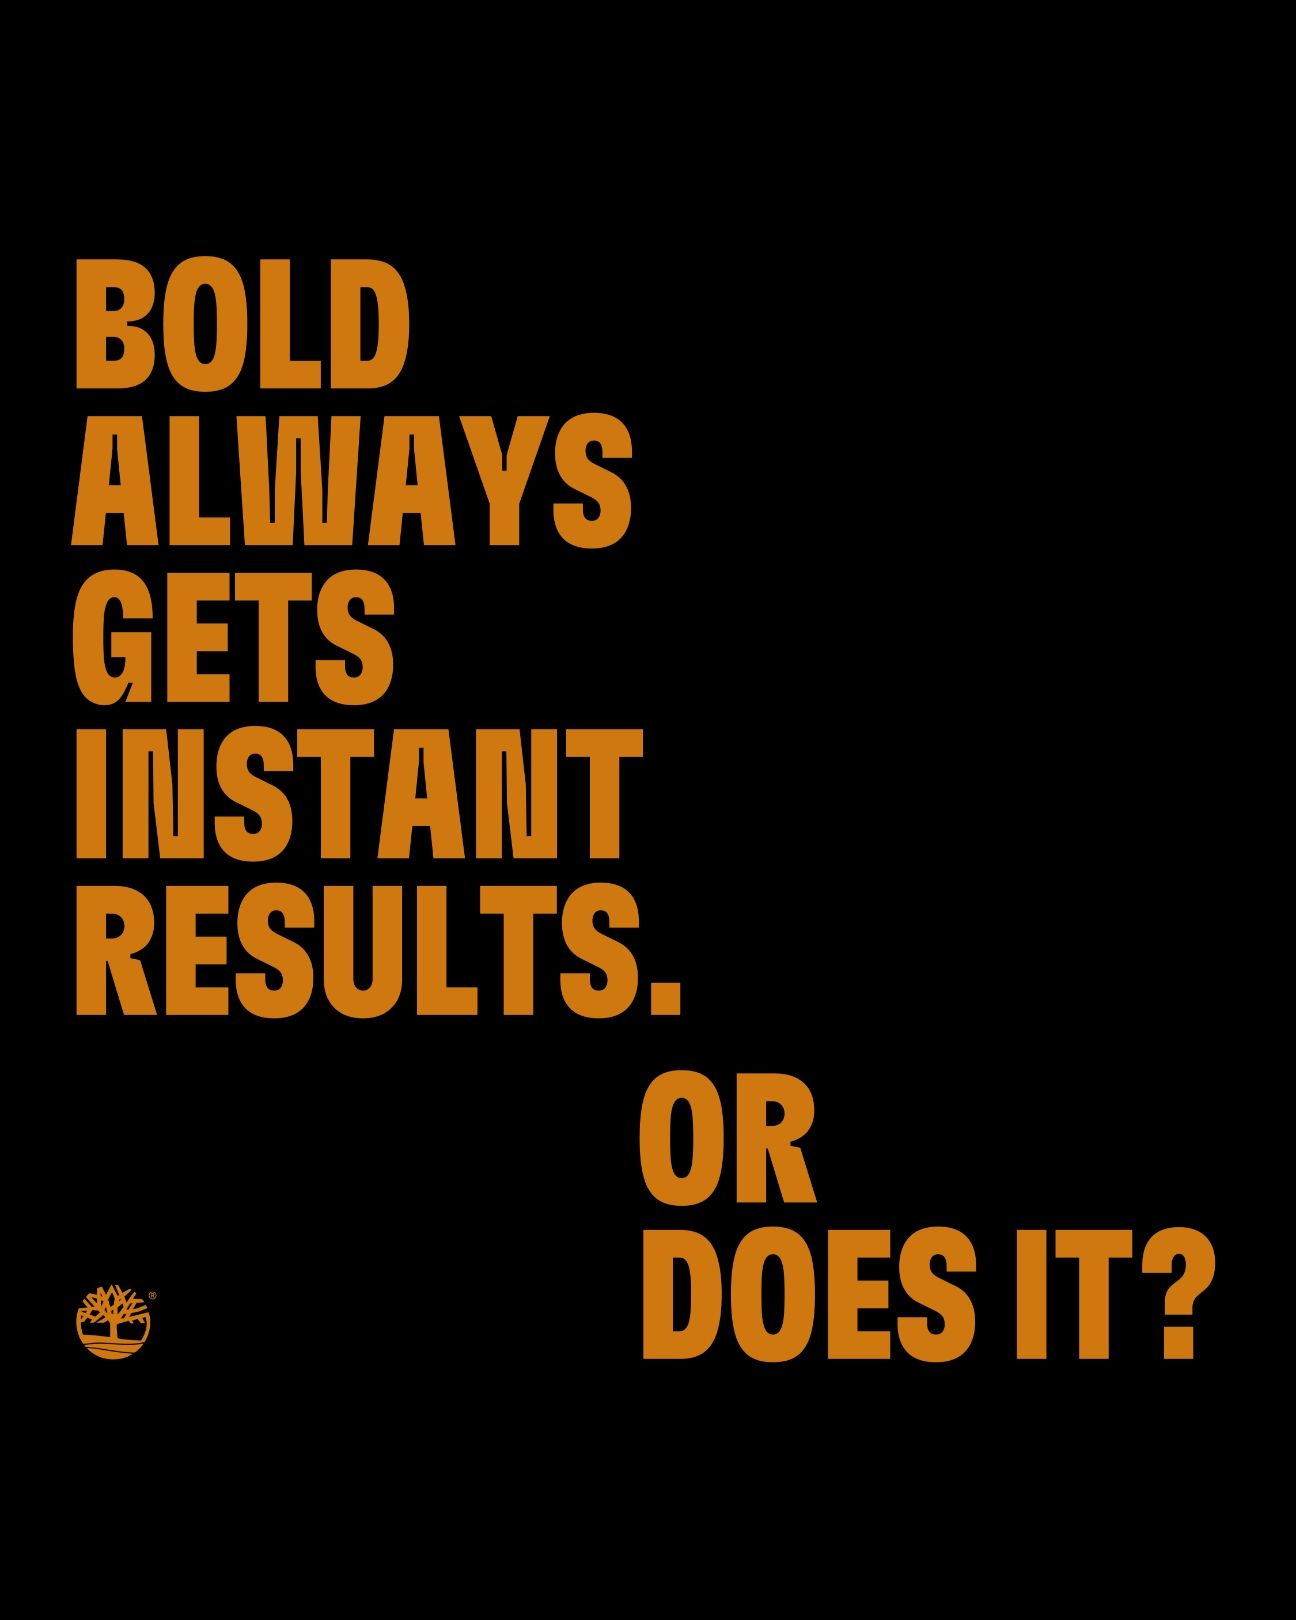 Bold always gets instant results. Or does it?